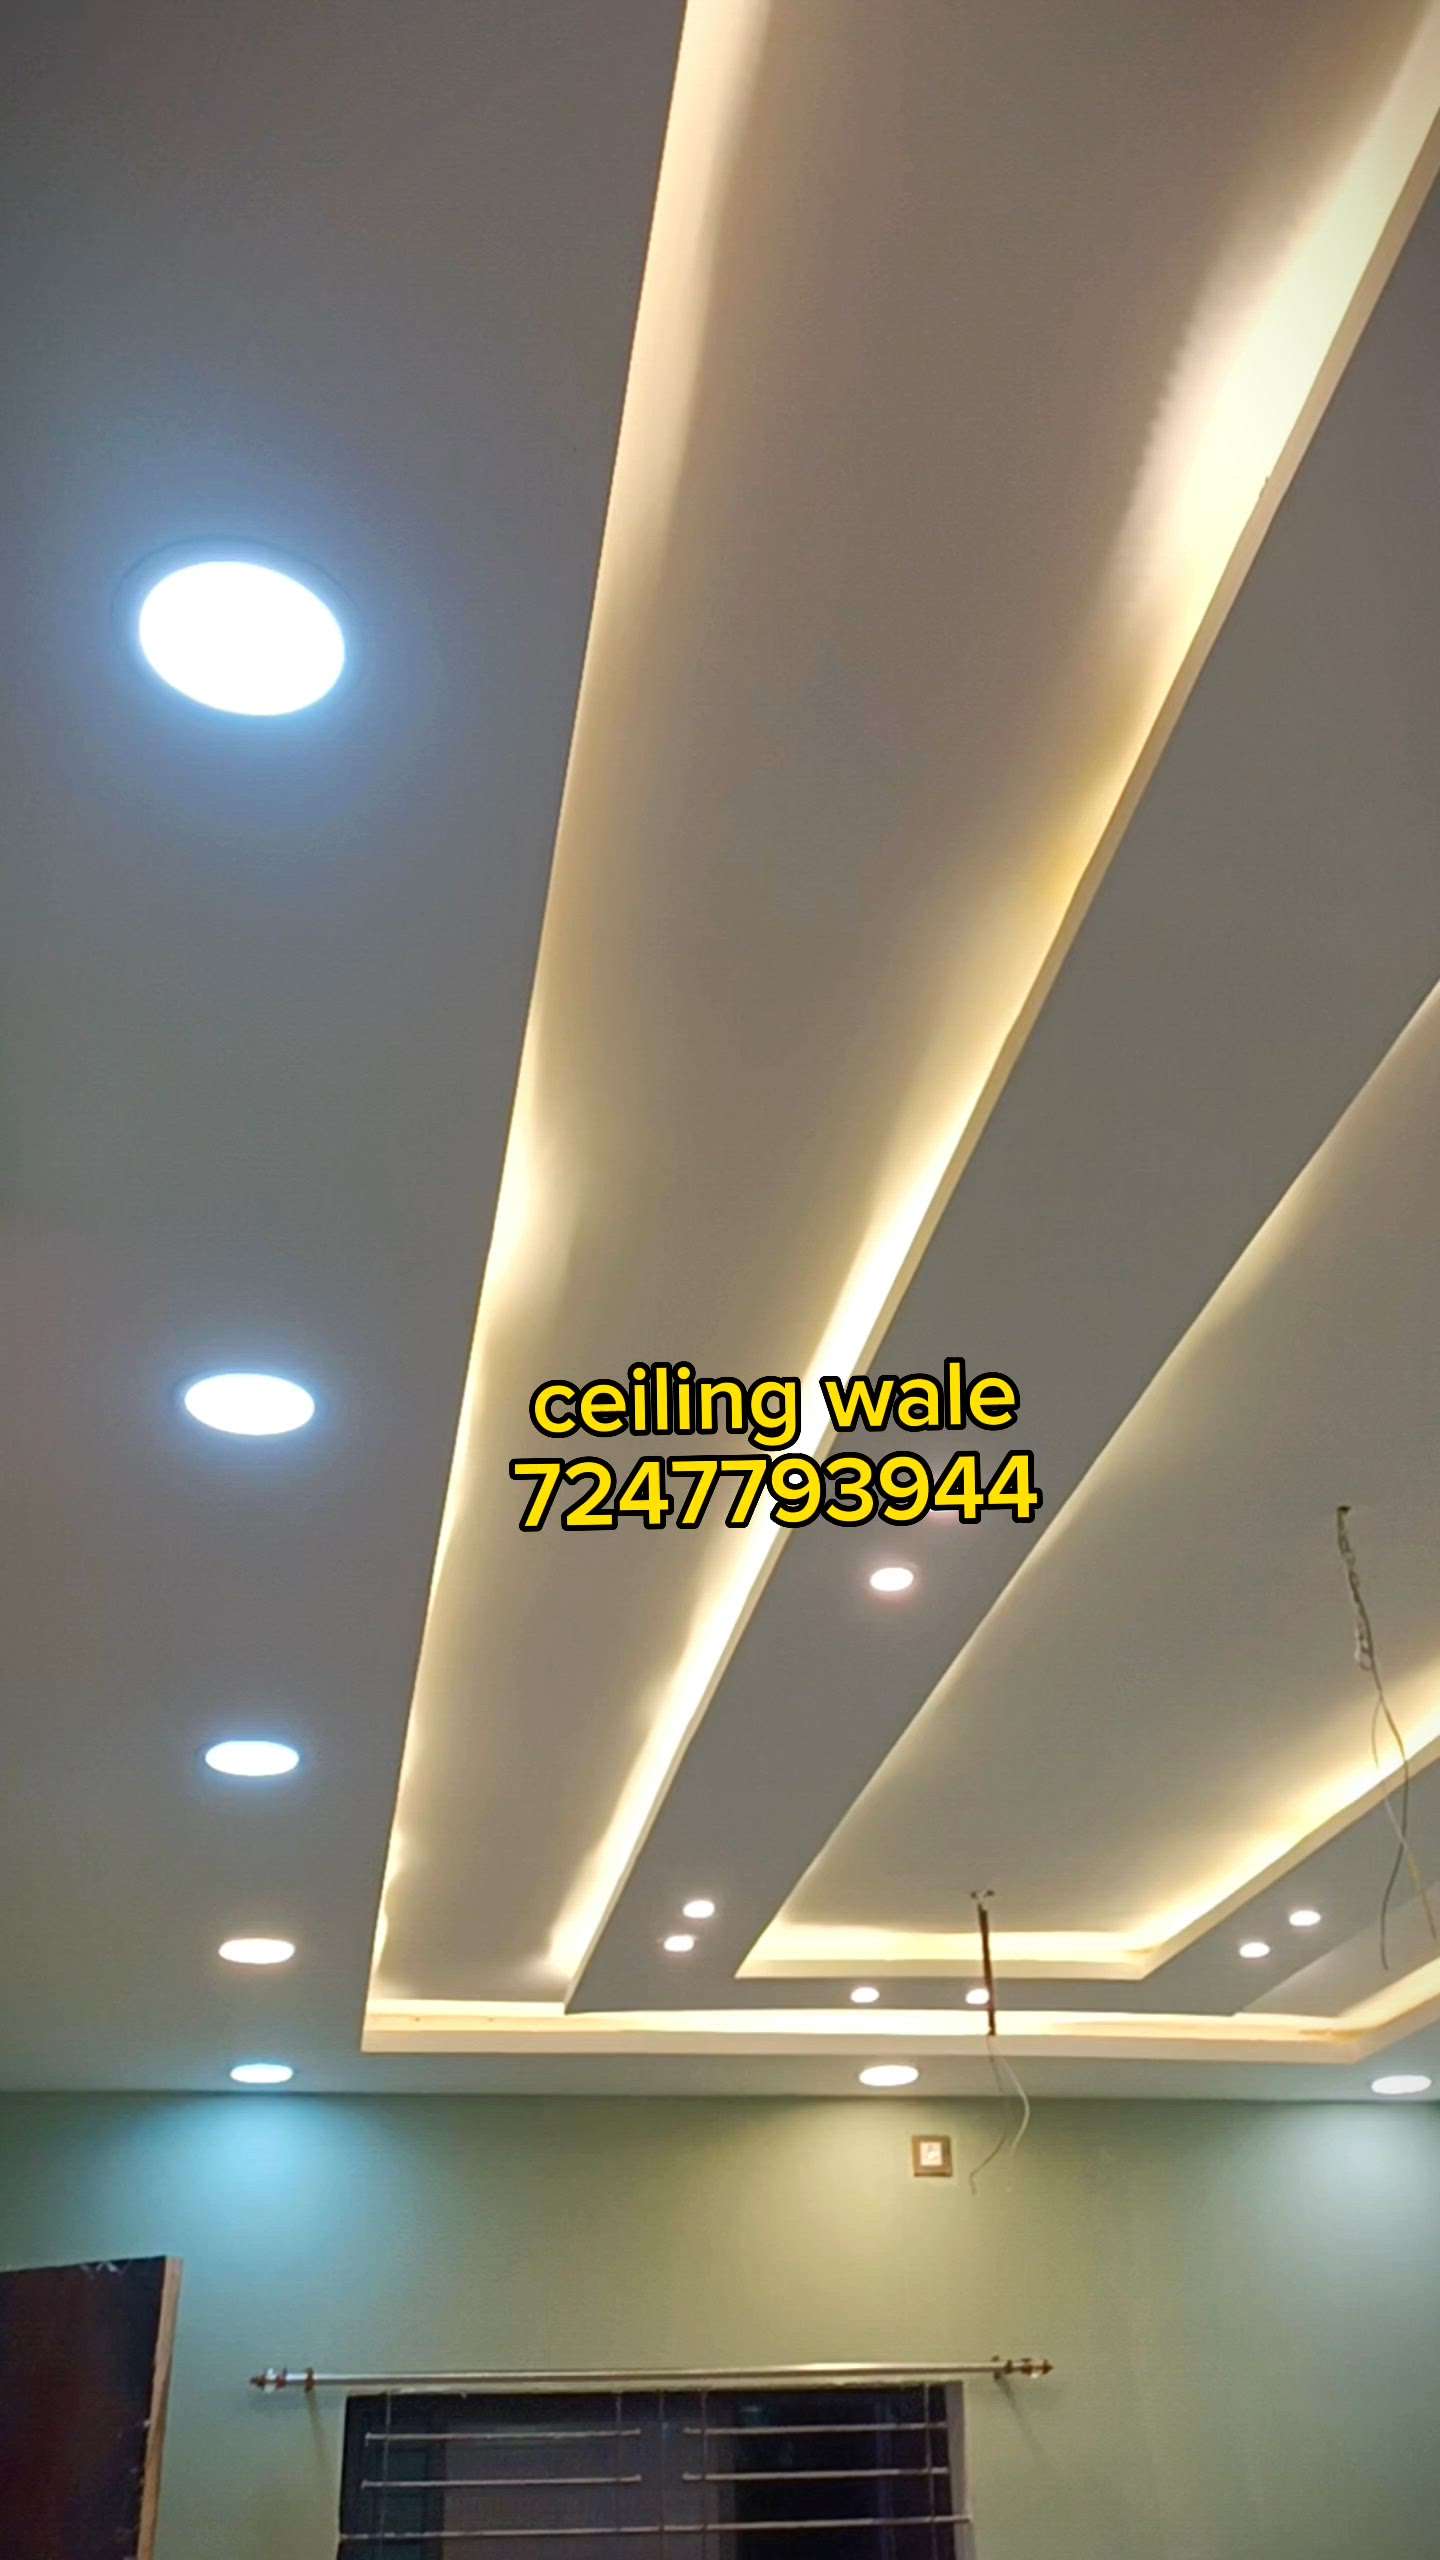 #GypsumCeiling & #popceiling 
best quality work only 🥳🥳🎉
7247793944